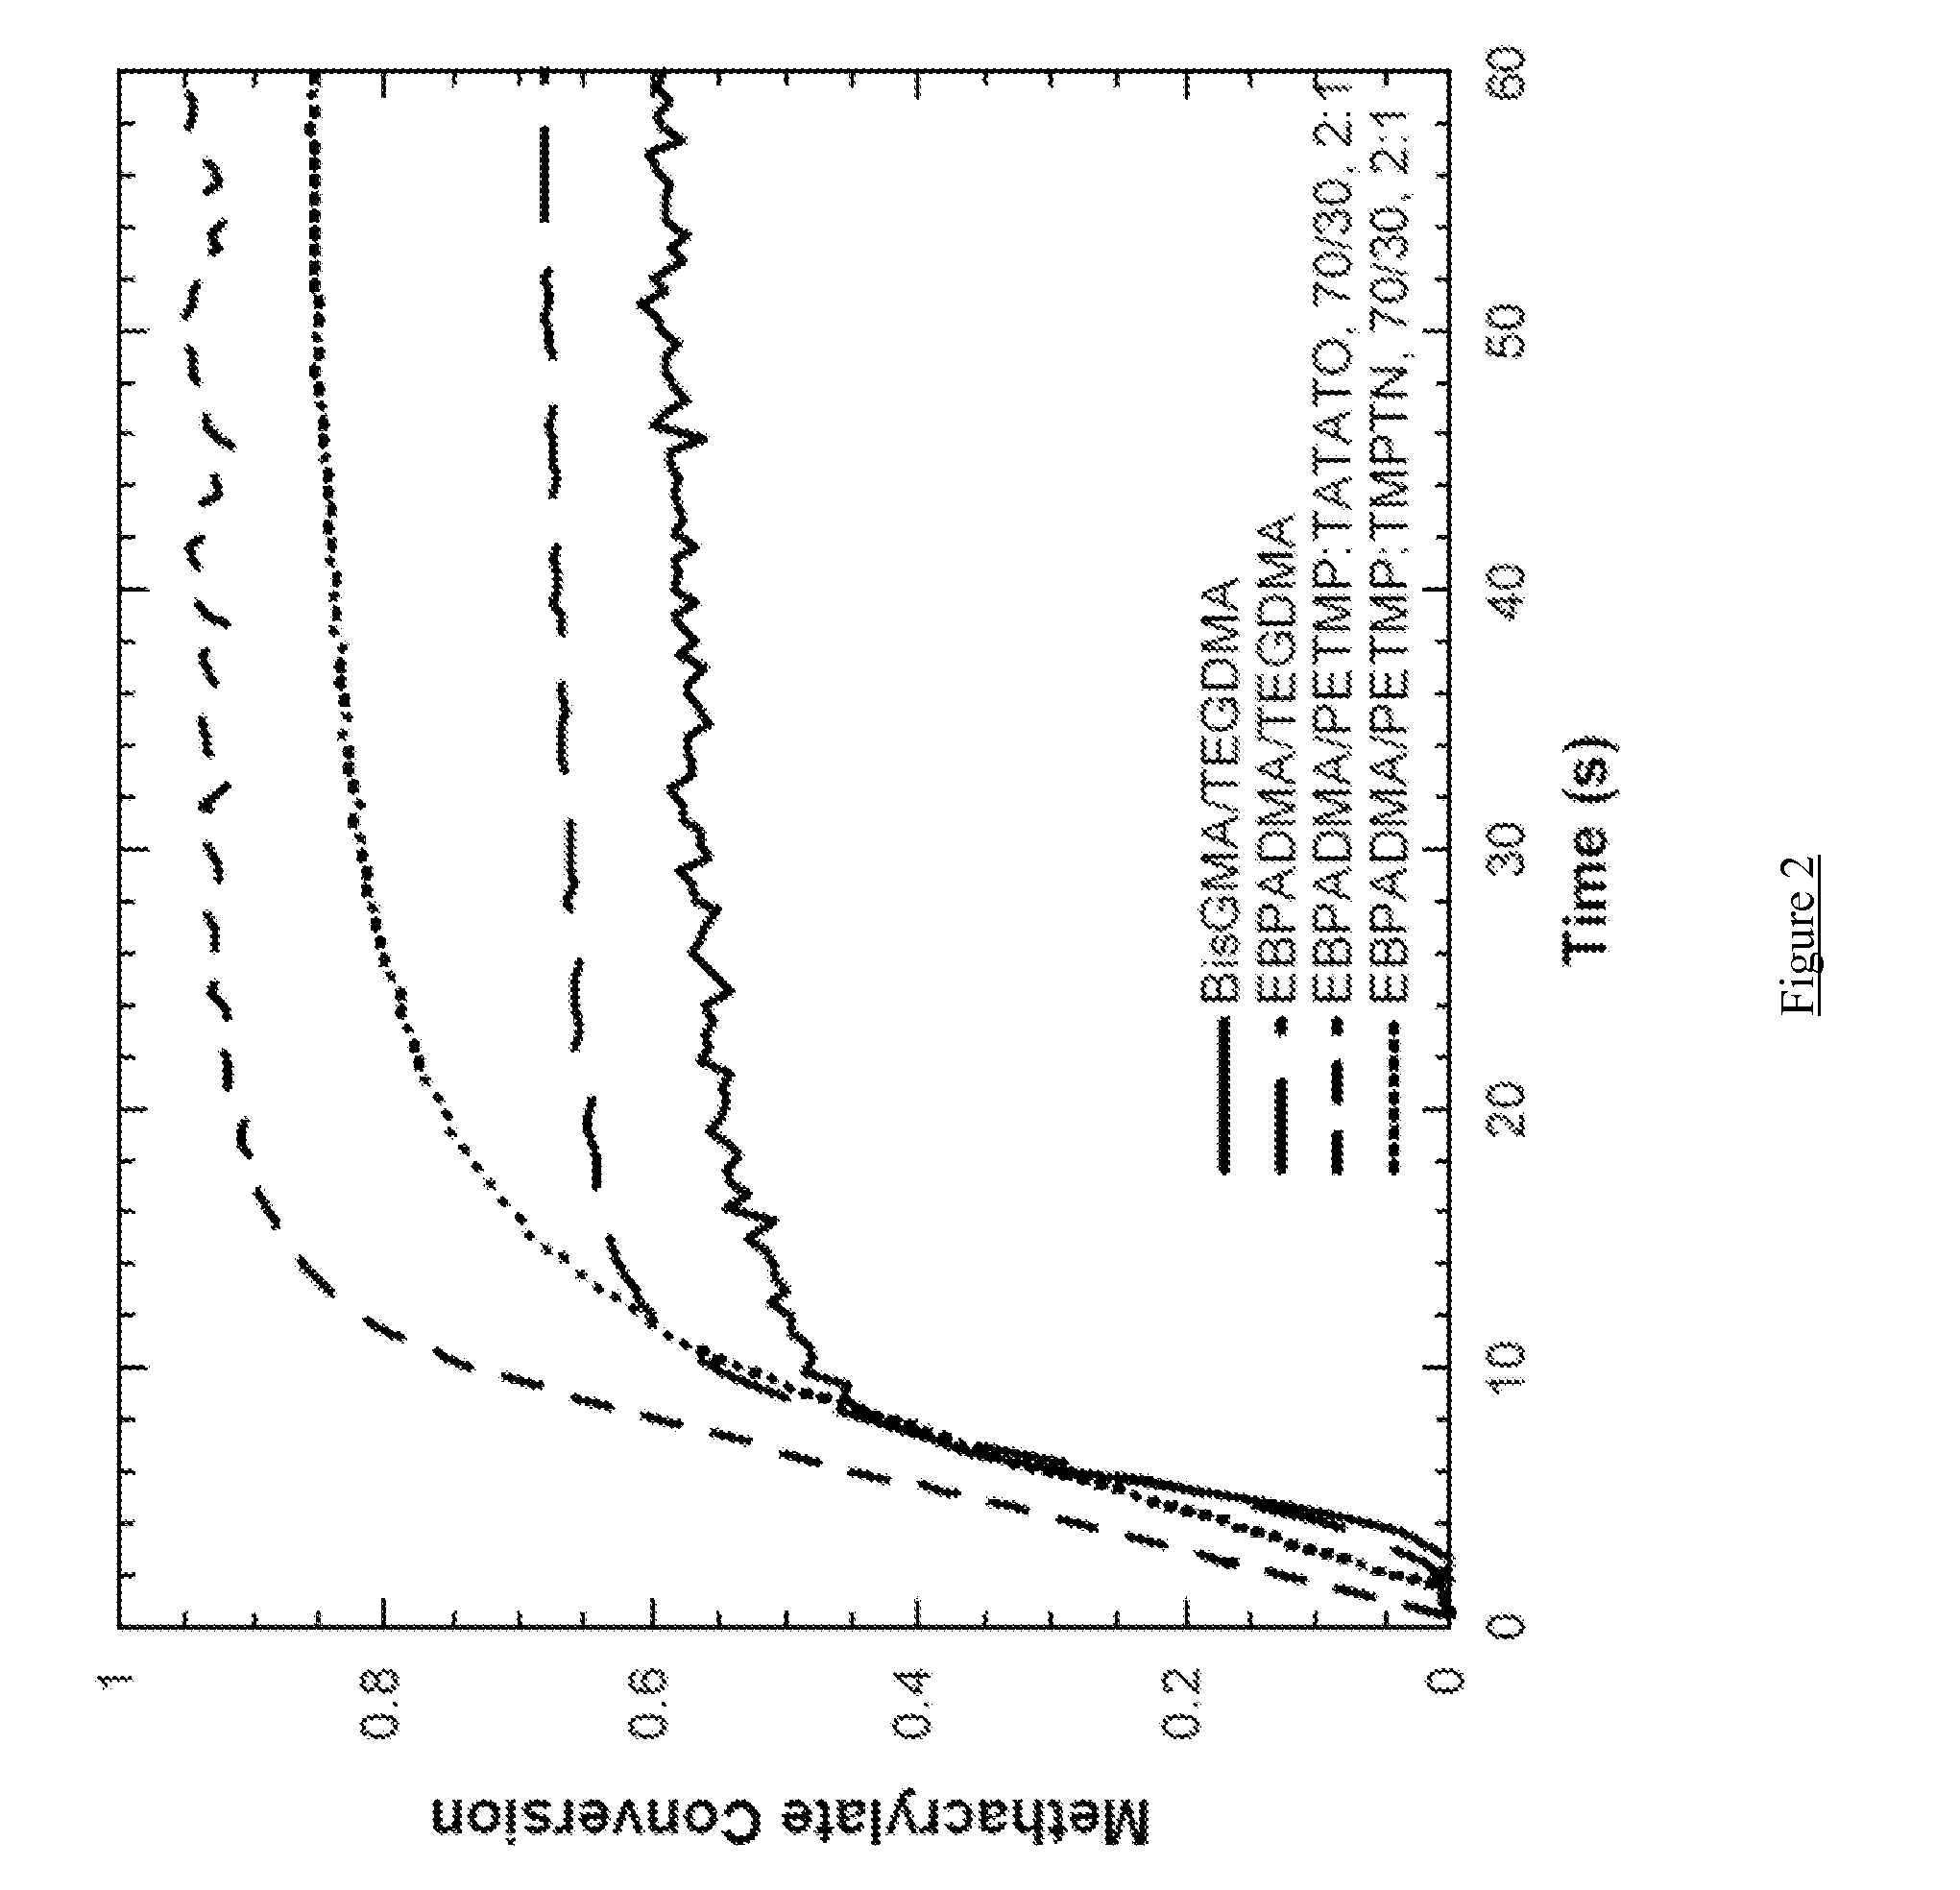 Resin systems for dental restorative materials and methods using same